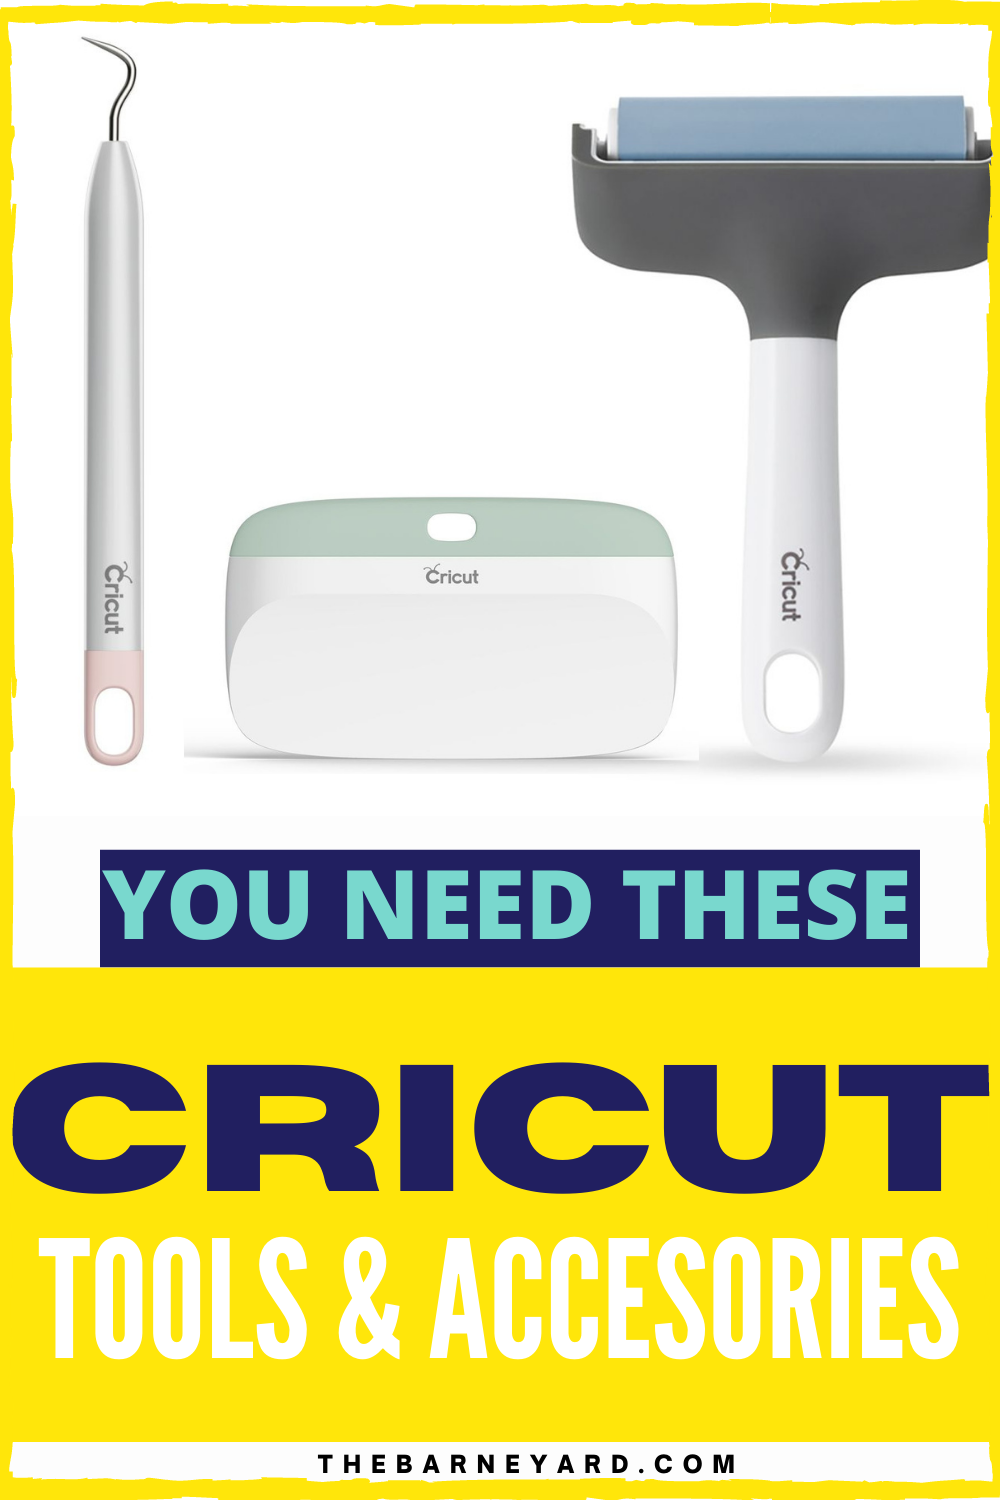 Cricut accessories you need right away - The Barne Yard